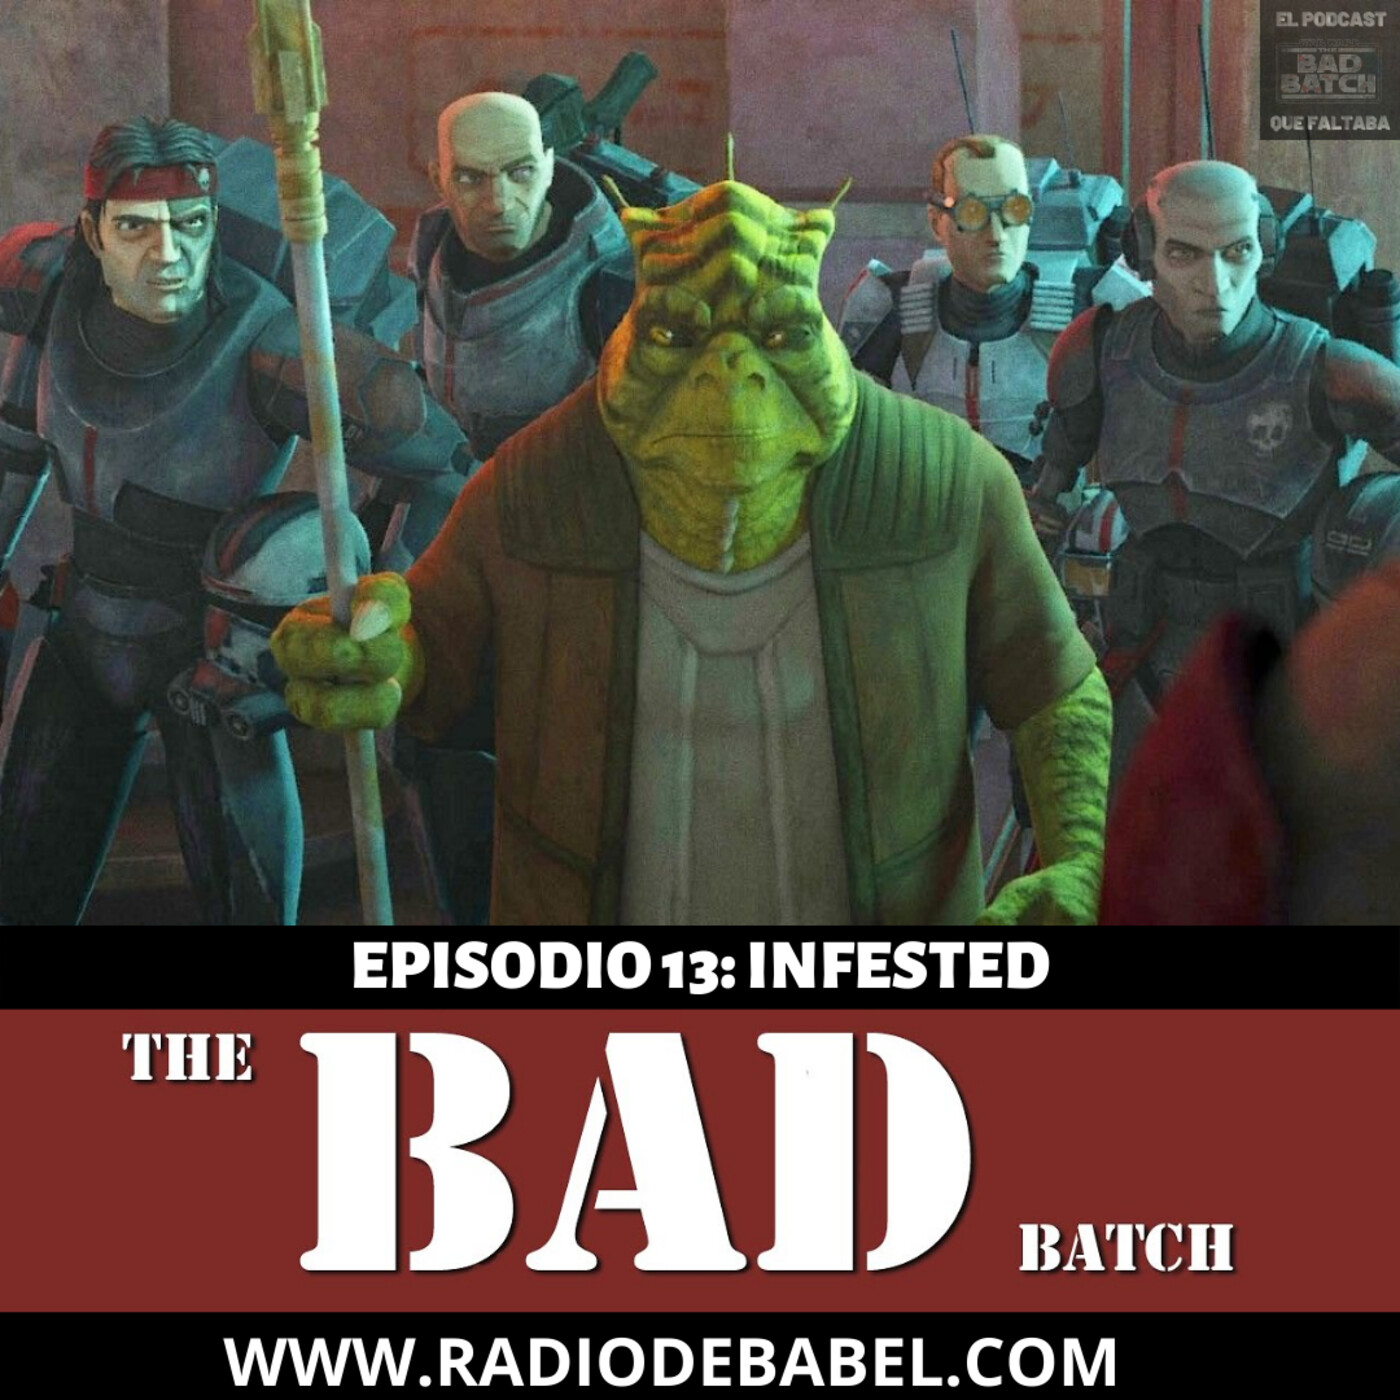 The Bad Batch - Episodio 13: Infested